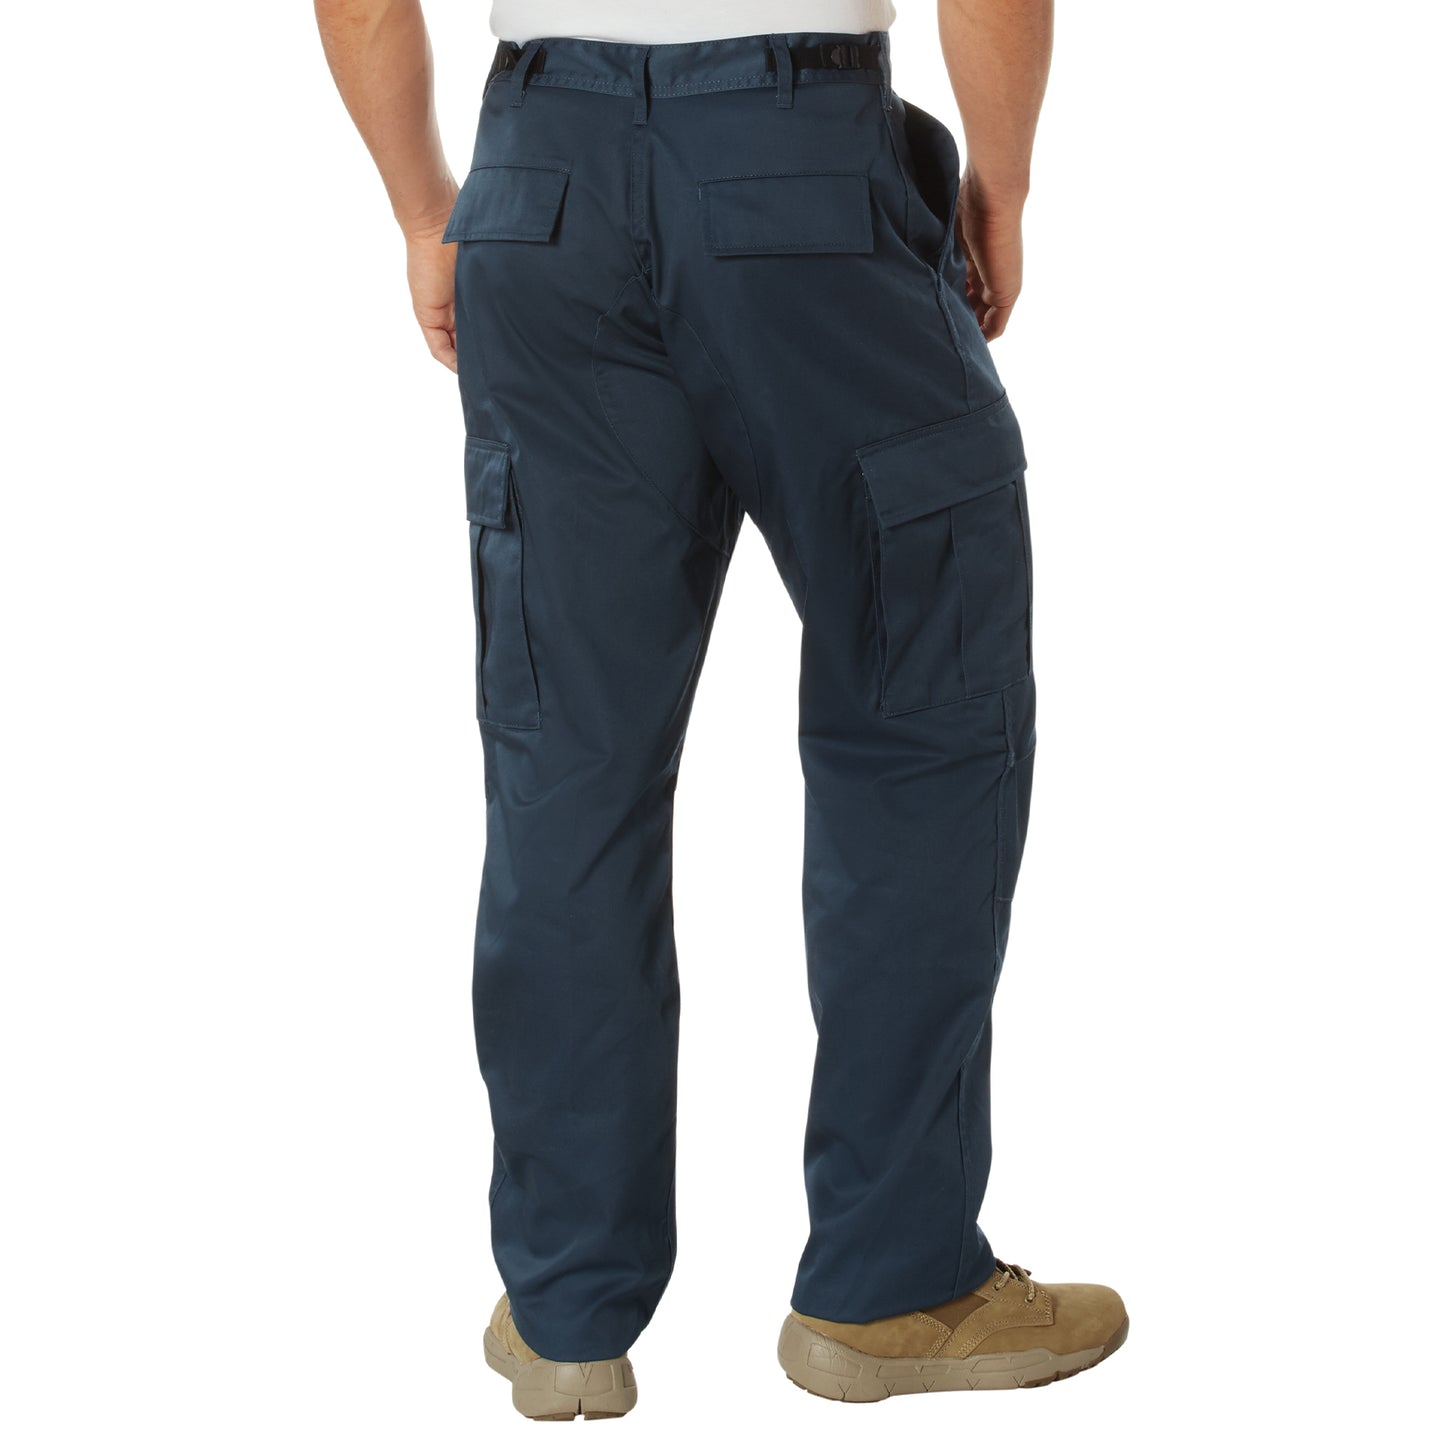 BDU Tactical Pants - Army Style Cargo Work Fatigues